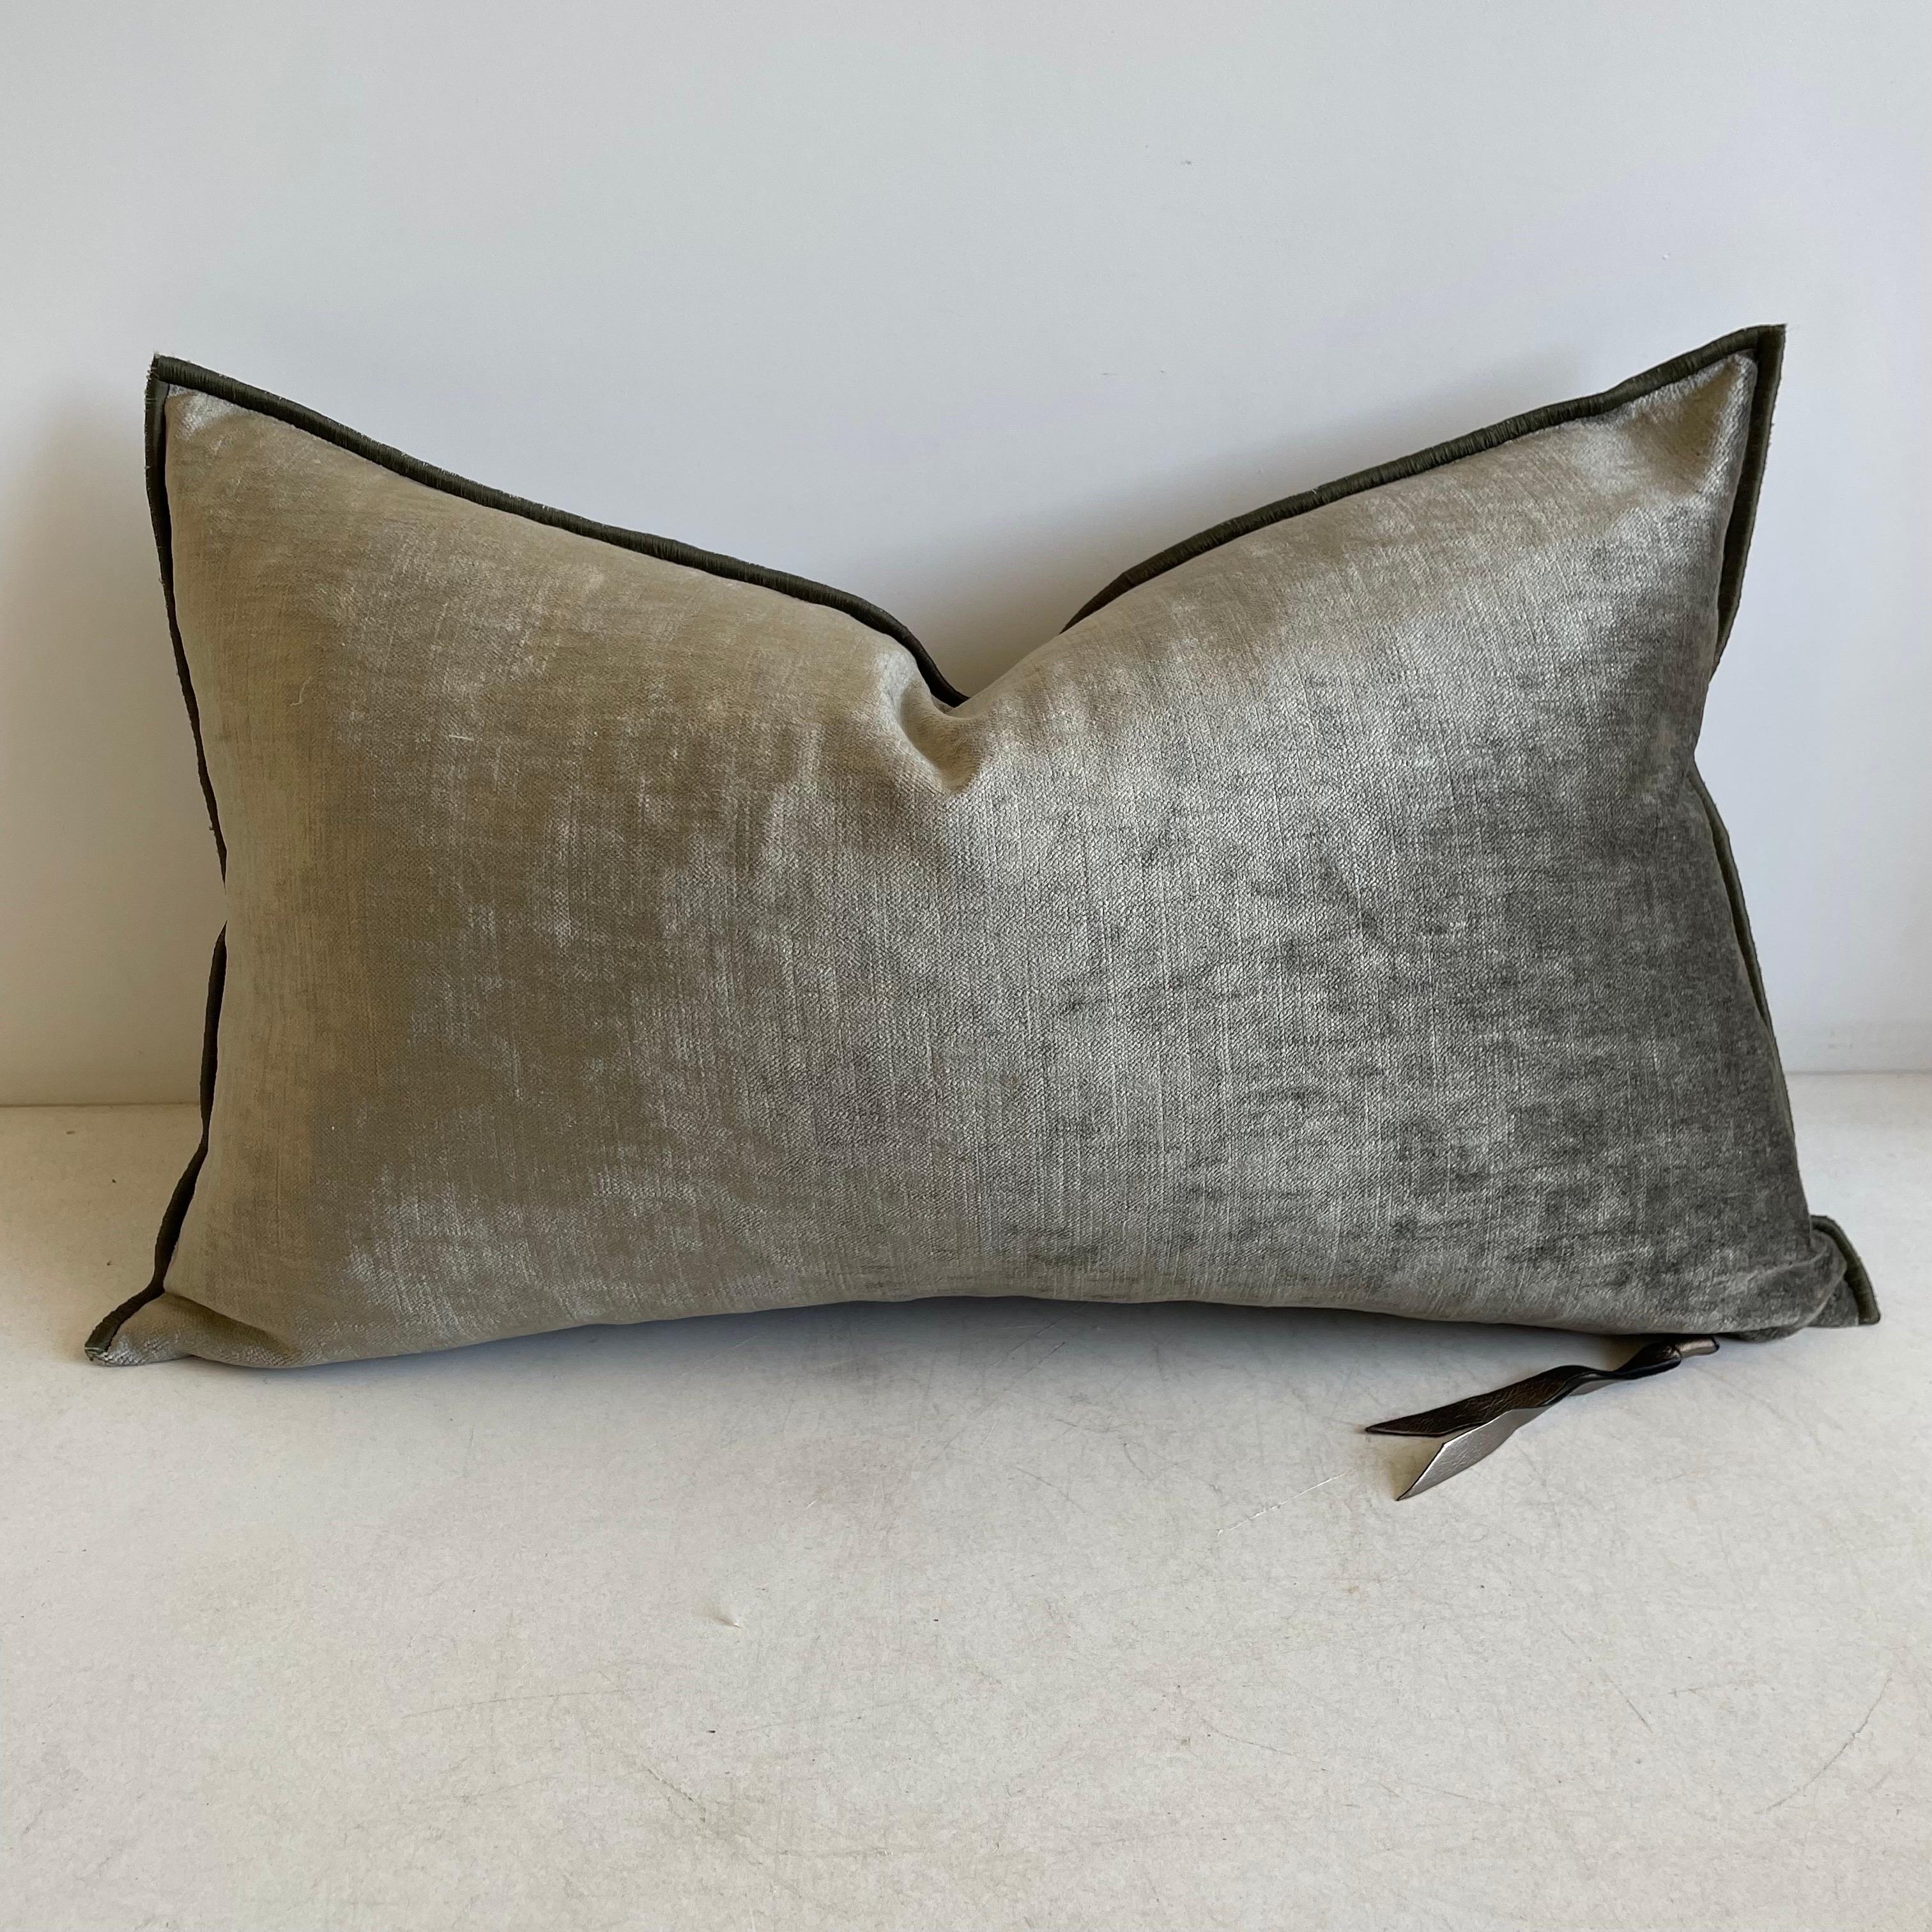 Beautiful deep French Royal Velvet Lumbar Pillow in Kaki color.
Kaki has a deep earthy tone in deep green gray.
Velvet lumbar with binded edge. 
Metal zipper closure, and leather pull. If this item is backordered, please allow 8-10 weeks for